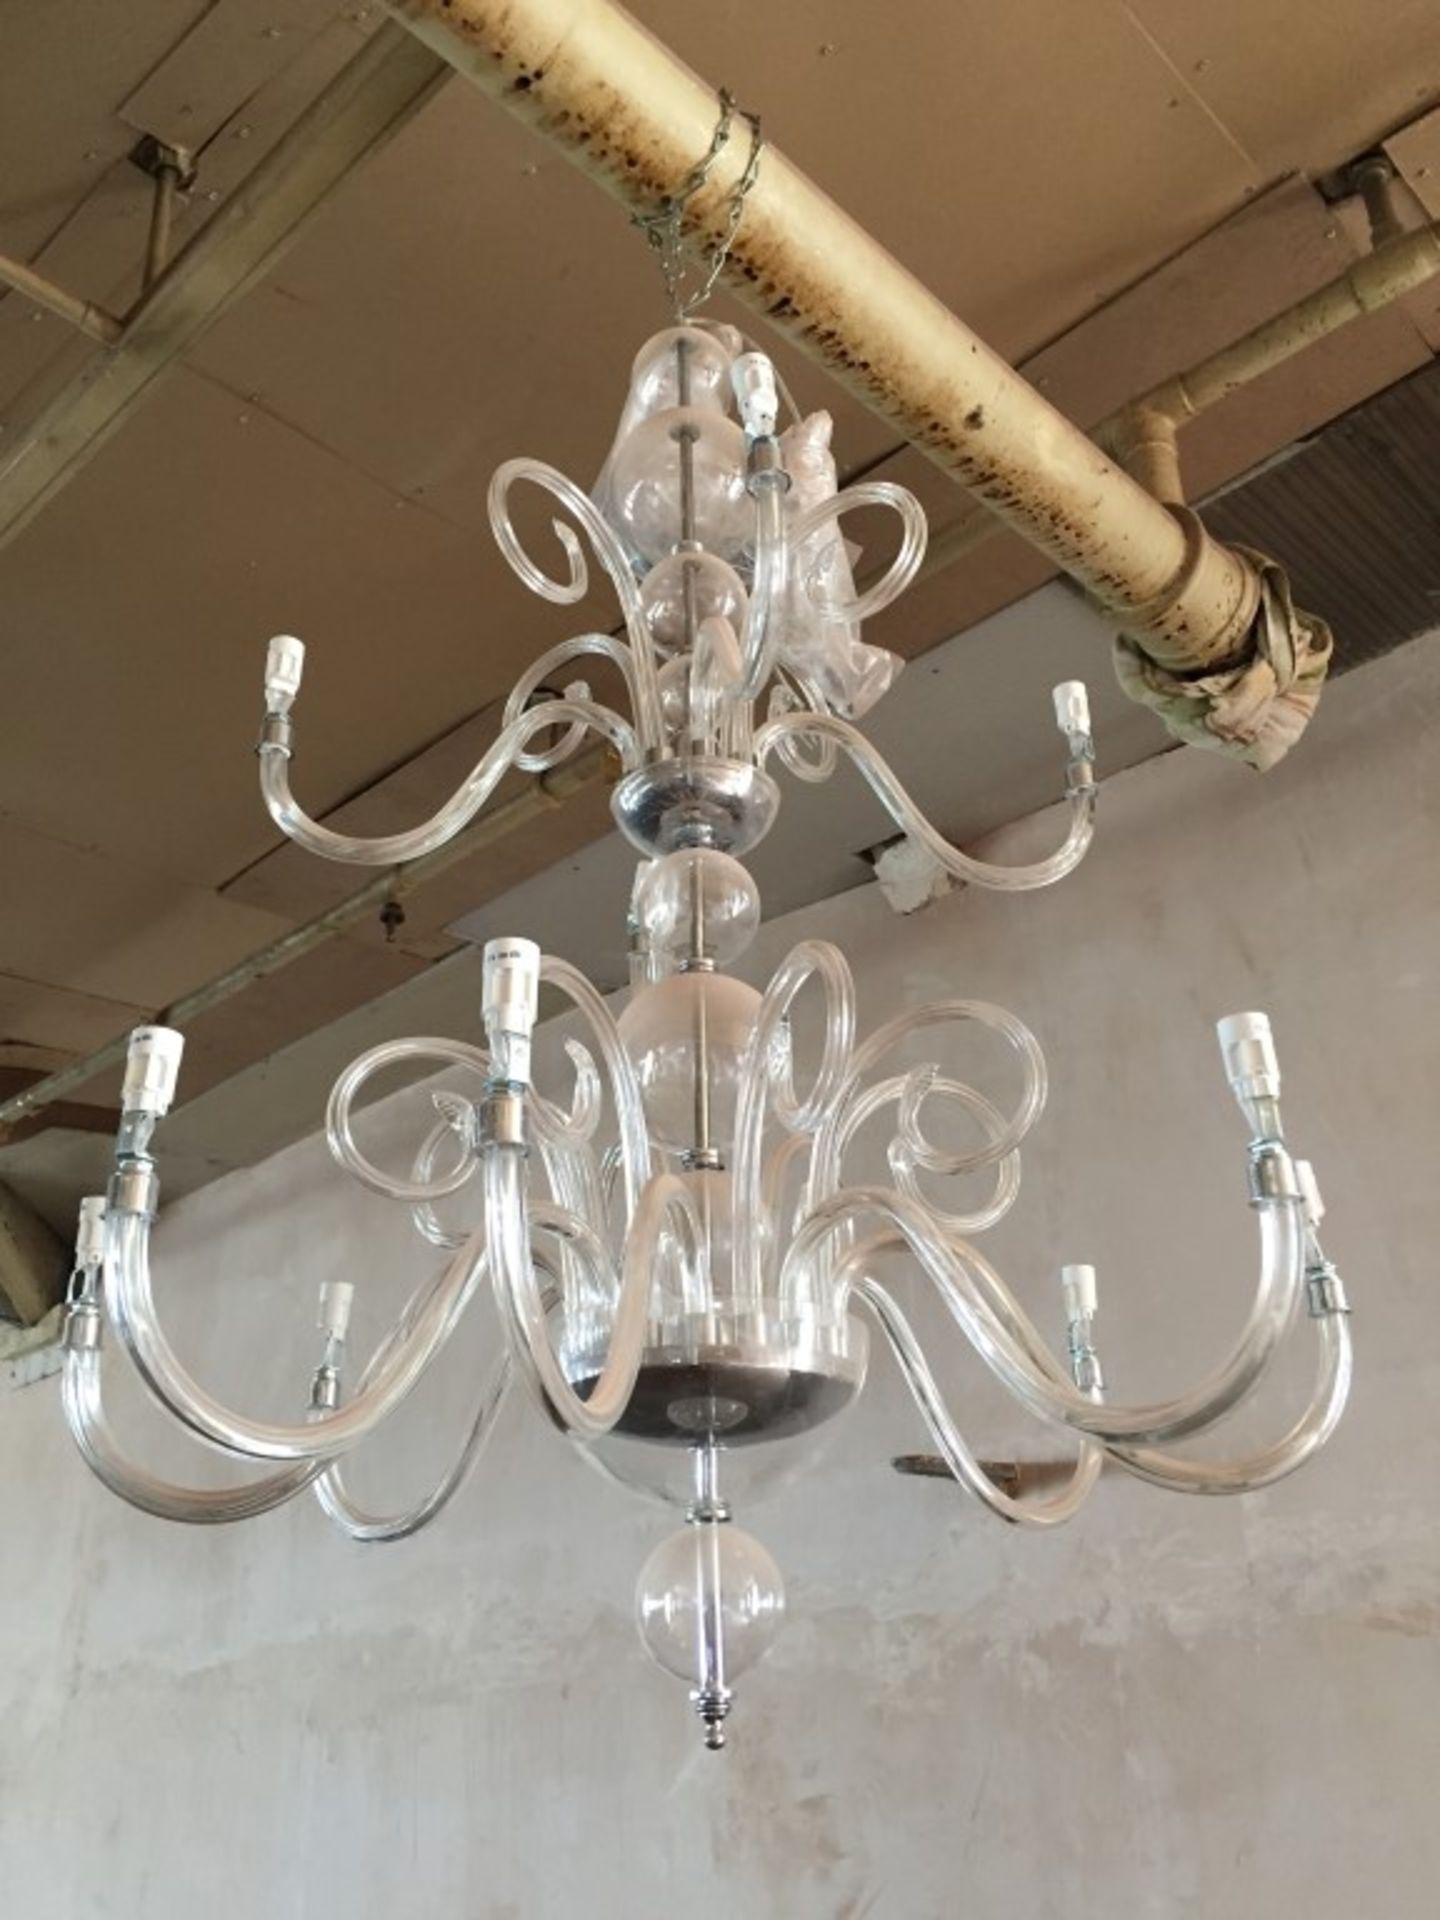 1 x Large, Ornate Chandelier-style Light Fitting - Dimensions To Follow - Ref: NDE083 - CL122 -